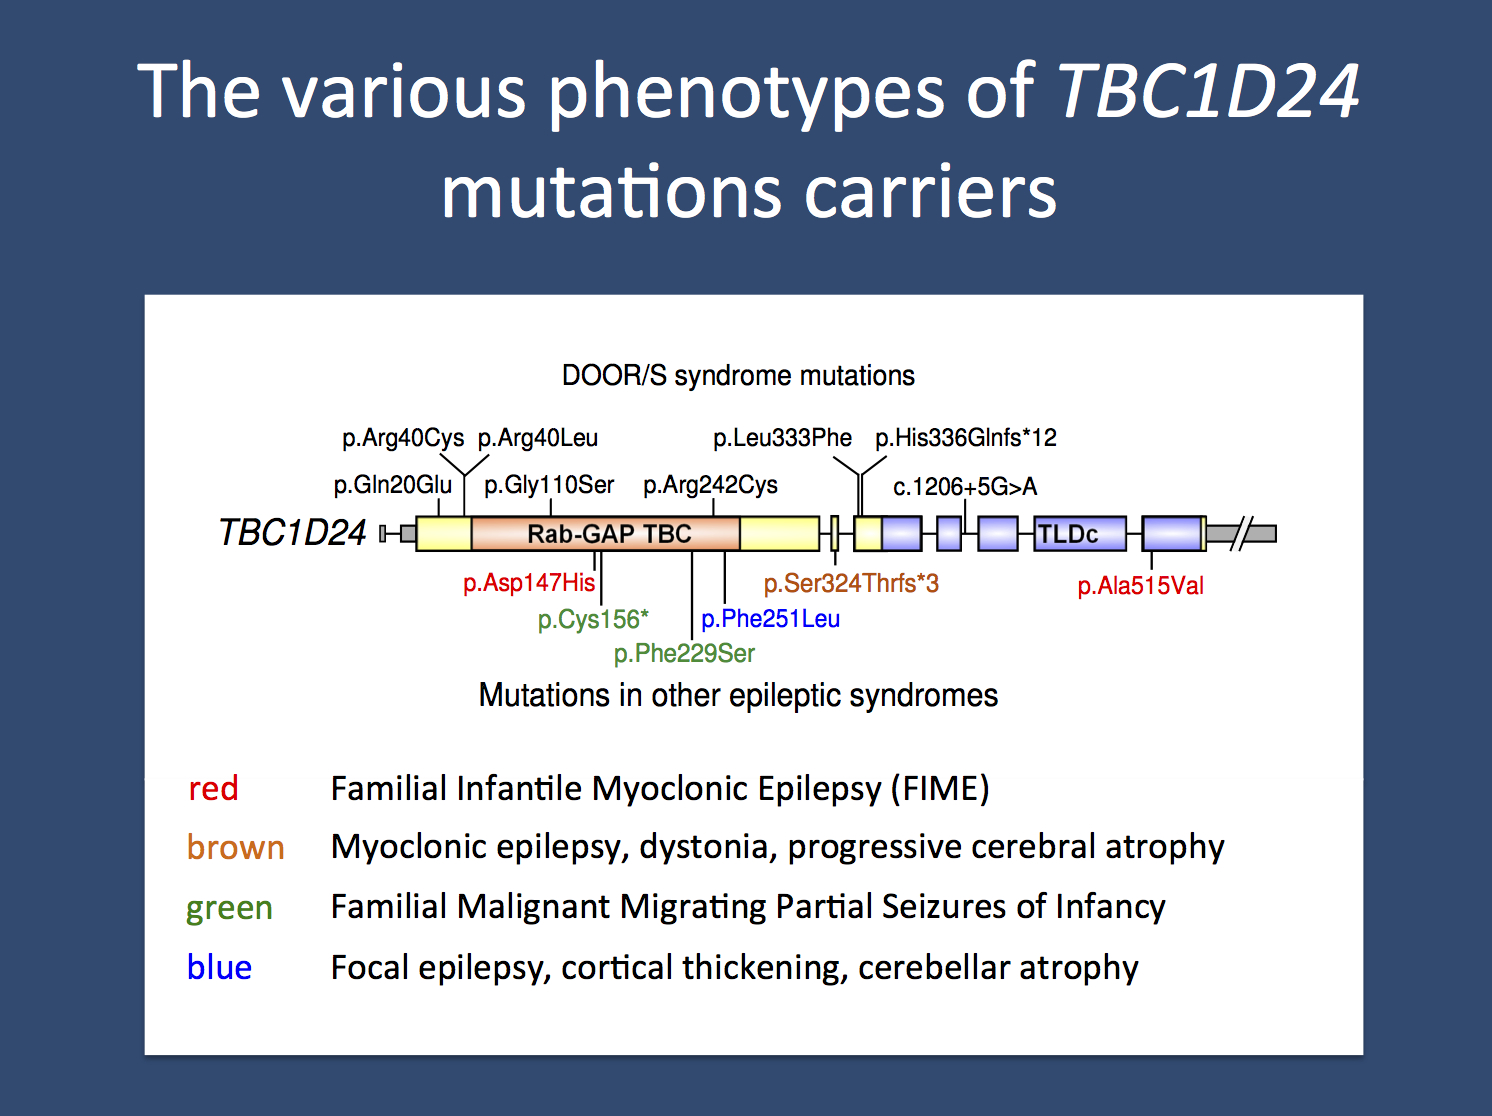 The various recessive and compound heterozygous epilepsy phenotypes due to mutations in TBC1D24.  